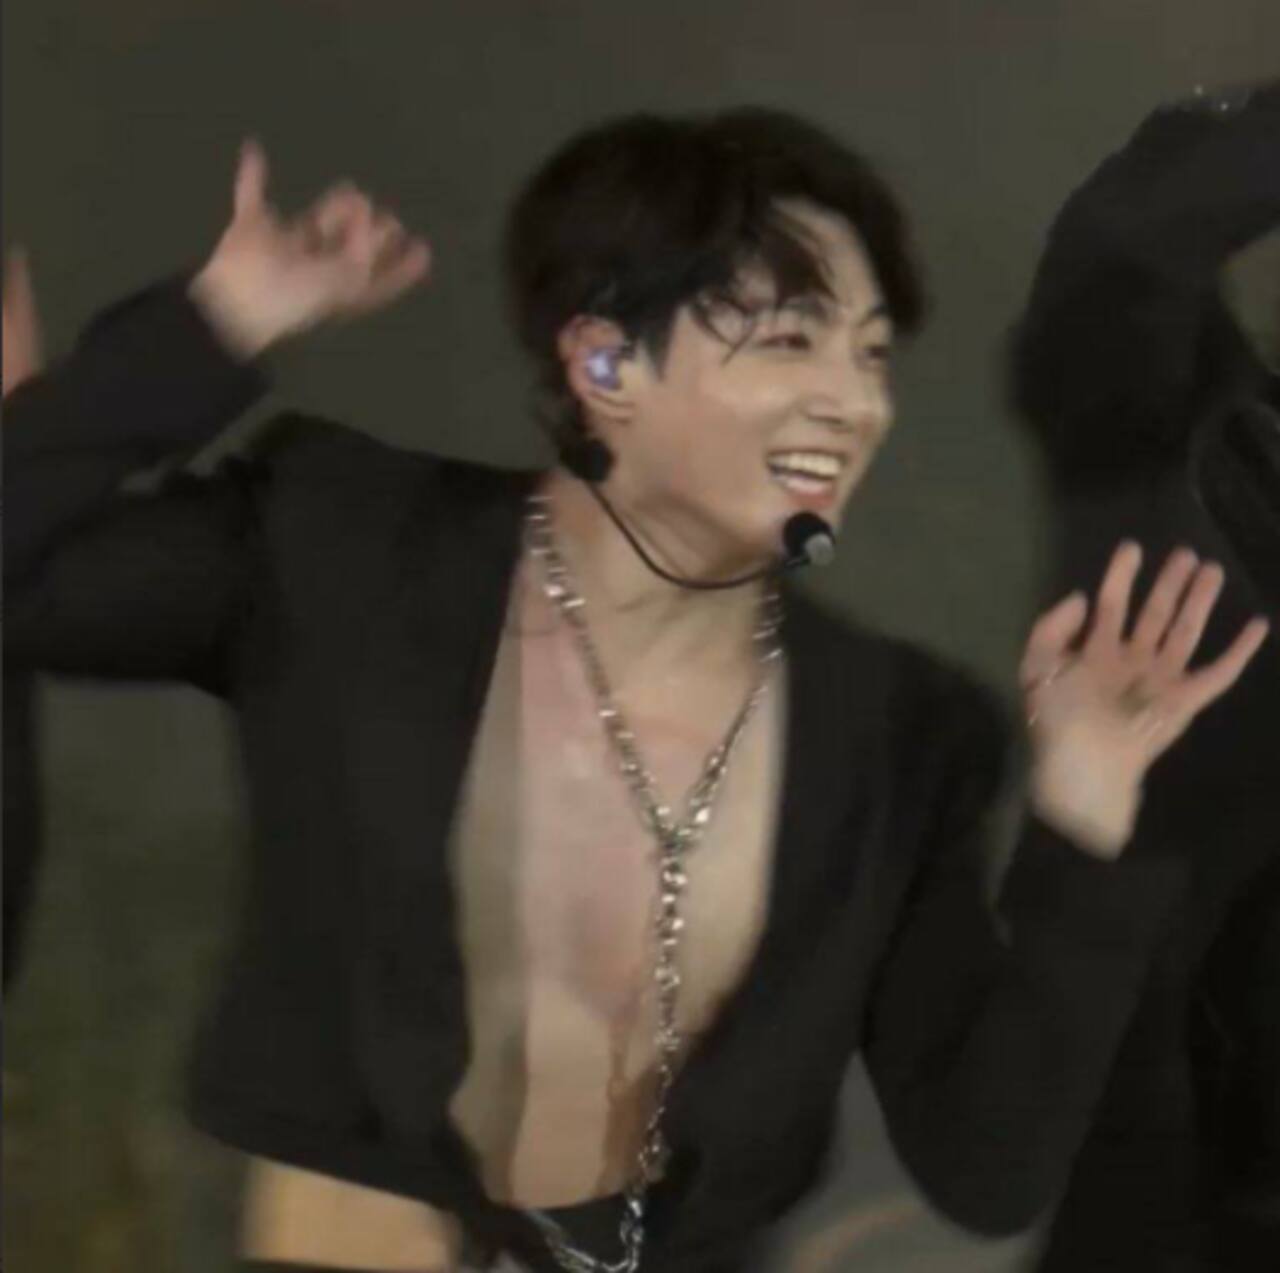 Bts Ptd In Seoul Day 3 Jungkook Laughs Off The Exposé Of His Toned Chest After Button Rips Off